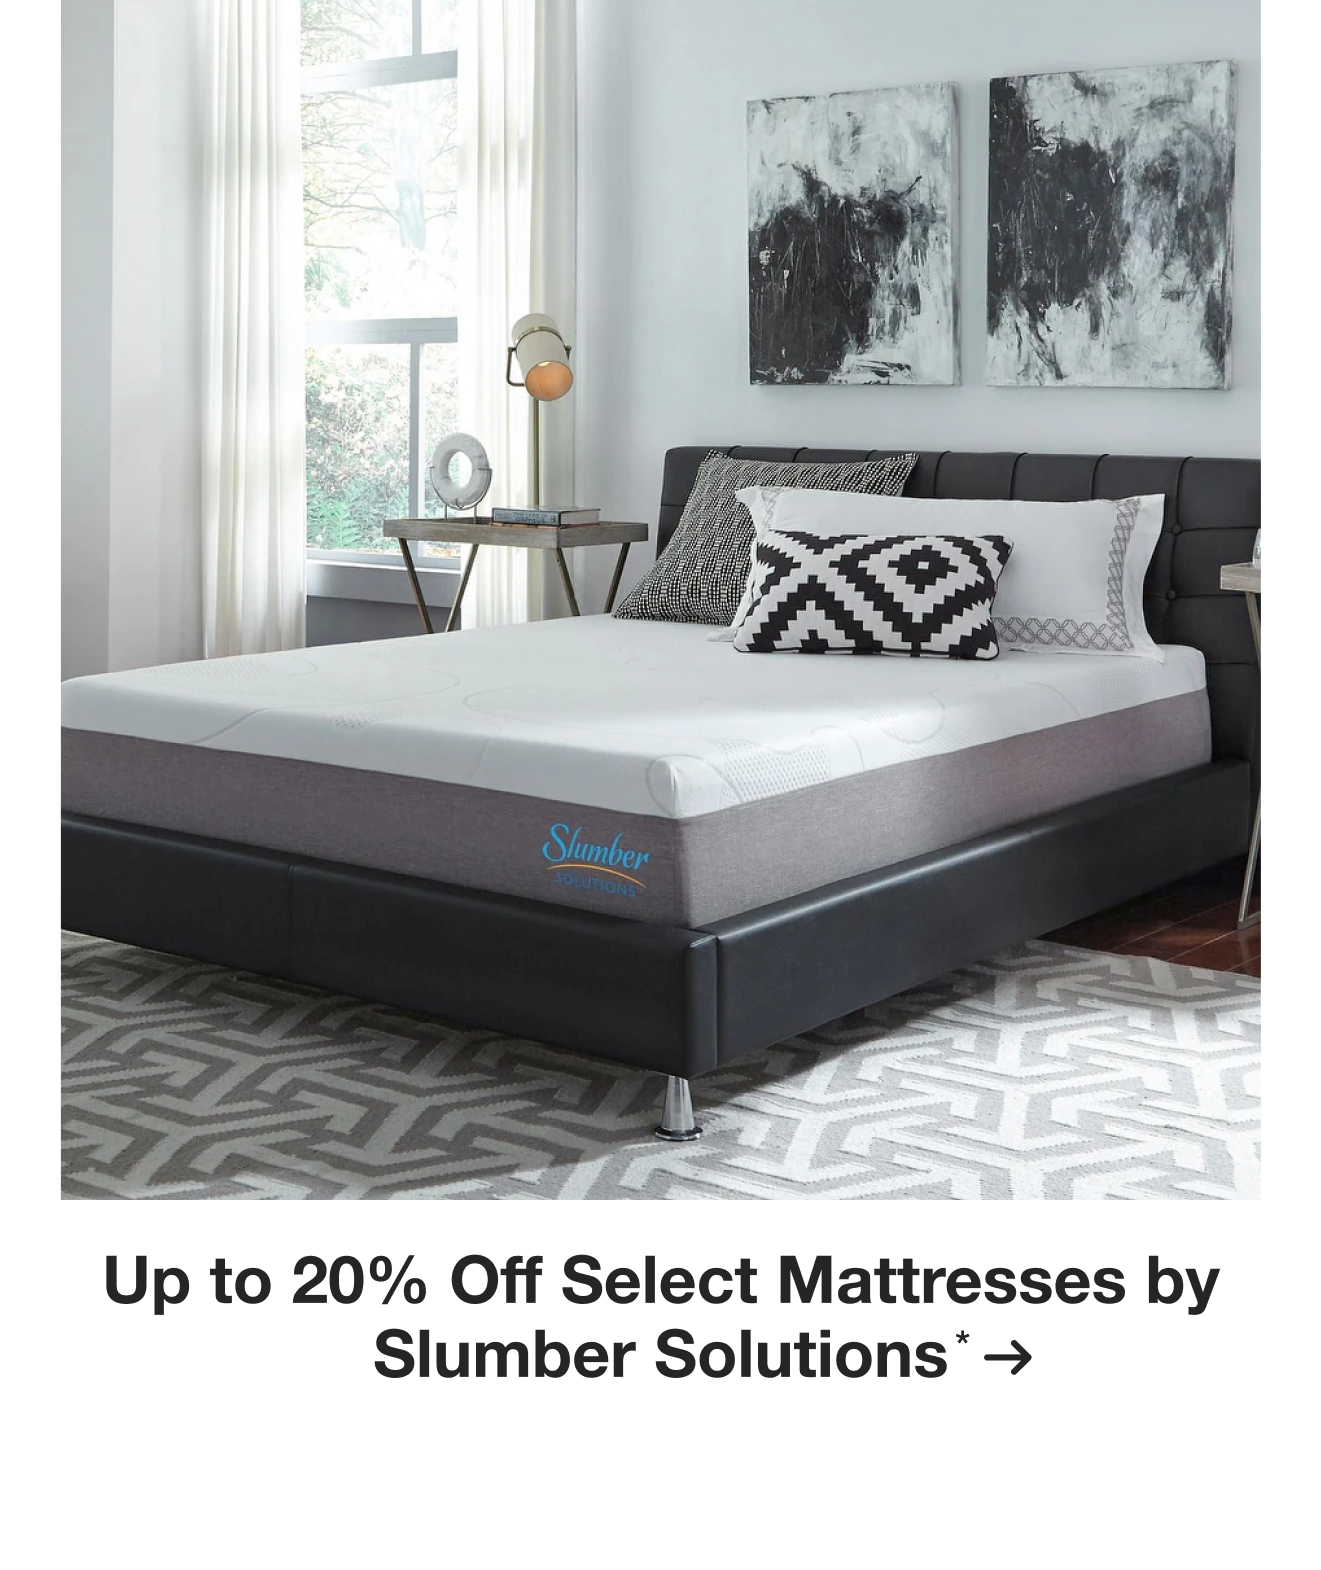 Up to 20% Off Select Mattresses by Slumber Solutions*